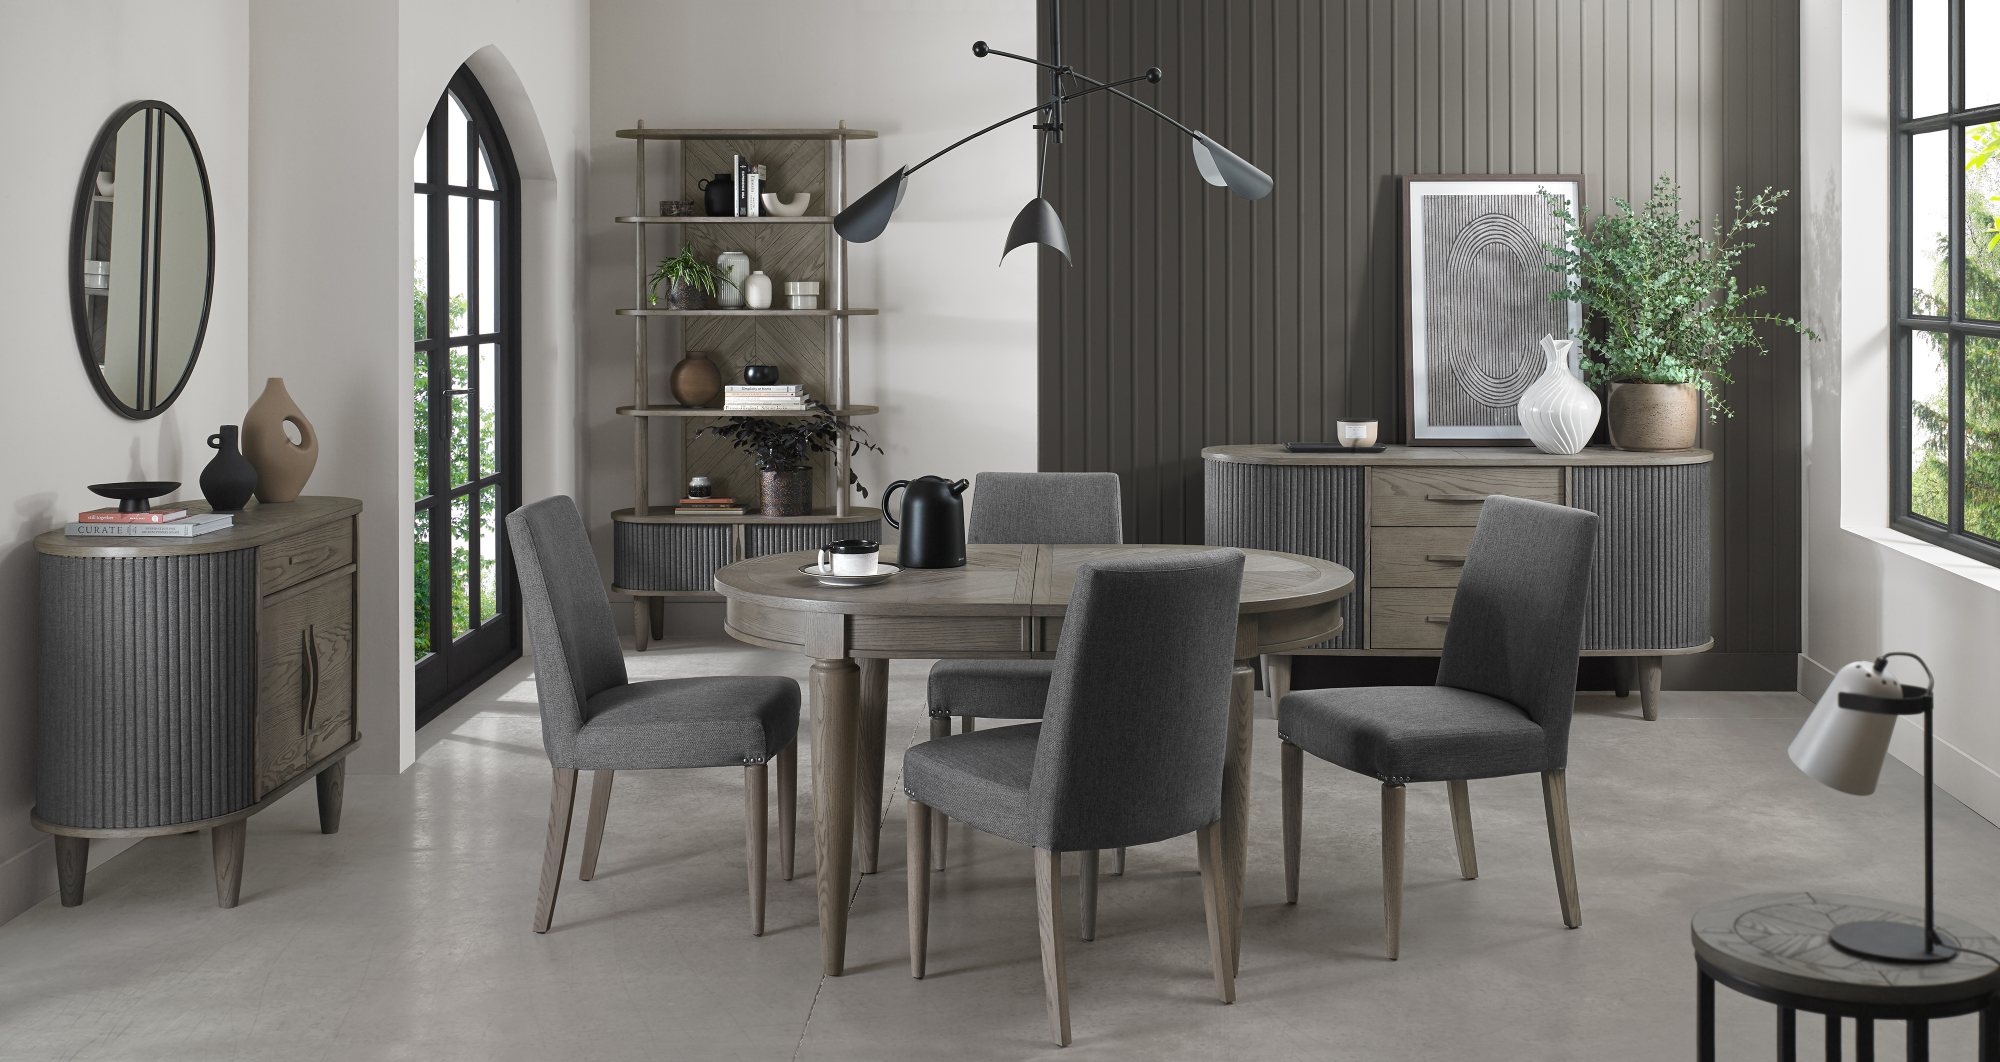 Home Origins Monet Silver Grey 4-6 Seater Dining Table & 4 Monet Silver Grey Upholstered Chairs- Slate Grey Fabric- lifestyle